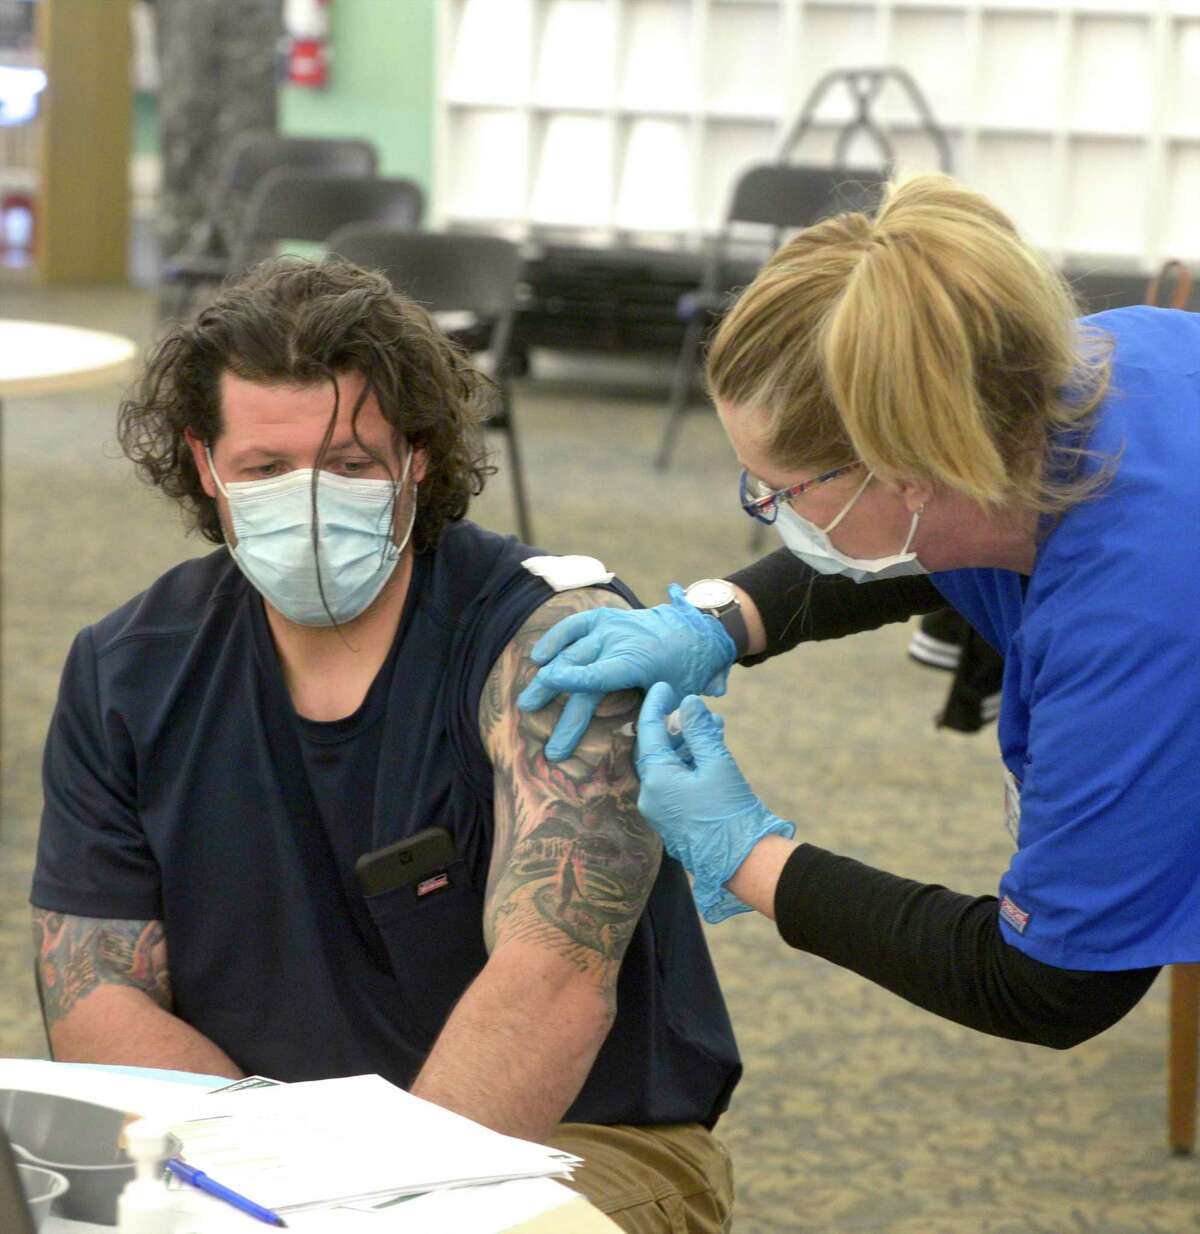 EMT Eugenia McGovern, right, from Griffin Health, administers the first shot of Moderna vaccine to Anthony Capirichio, of Danbury, who was a walk-in to the COVID-19 vaccine clinic held in the Danbury Public Library on Friday, April 30, 2021, in Danbury, Conn. The clinic is part of a partnership between the state, Federal Emergency Management Agency (FEMA) and the federal government.